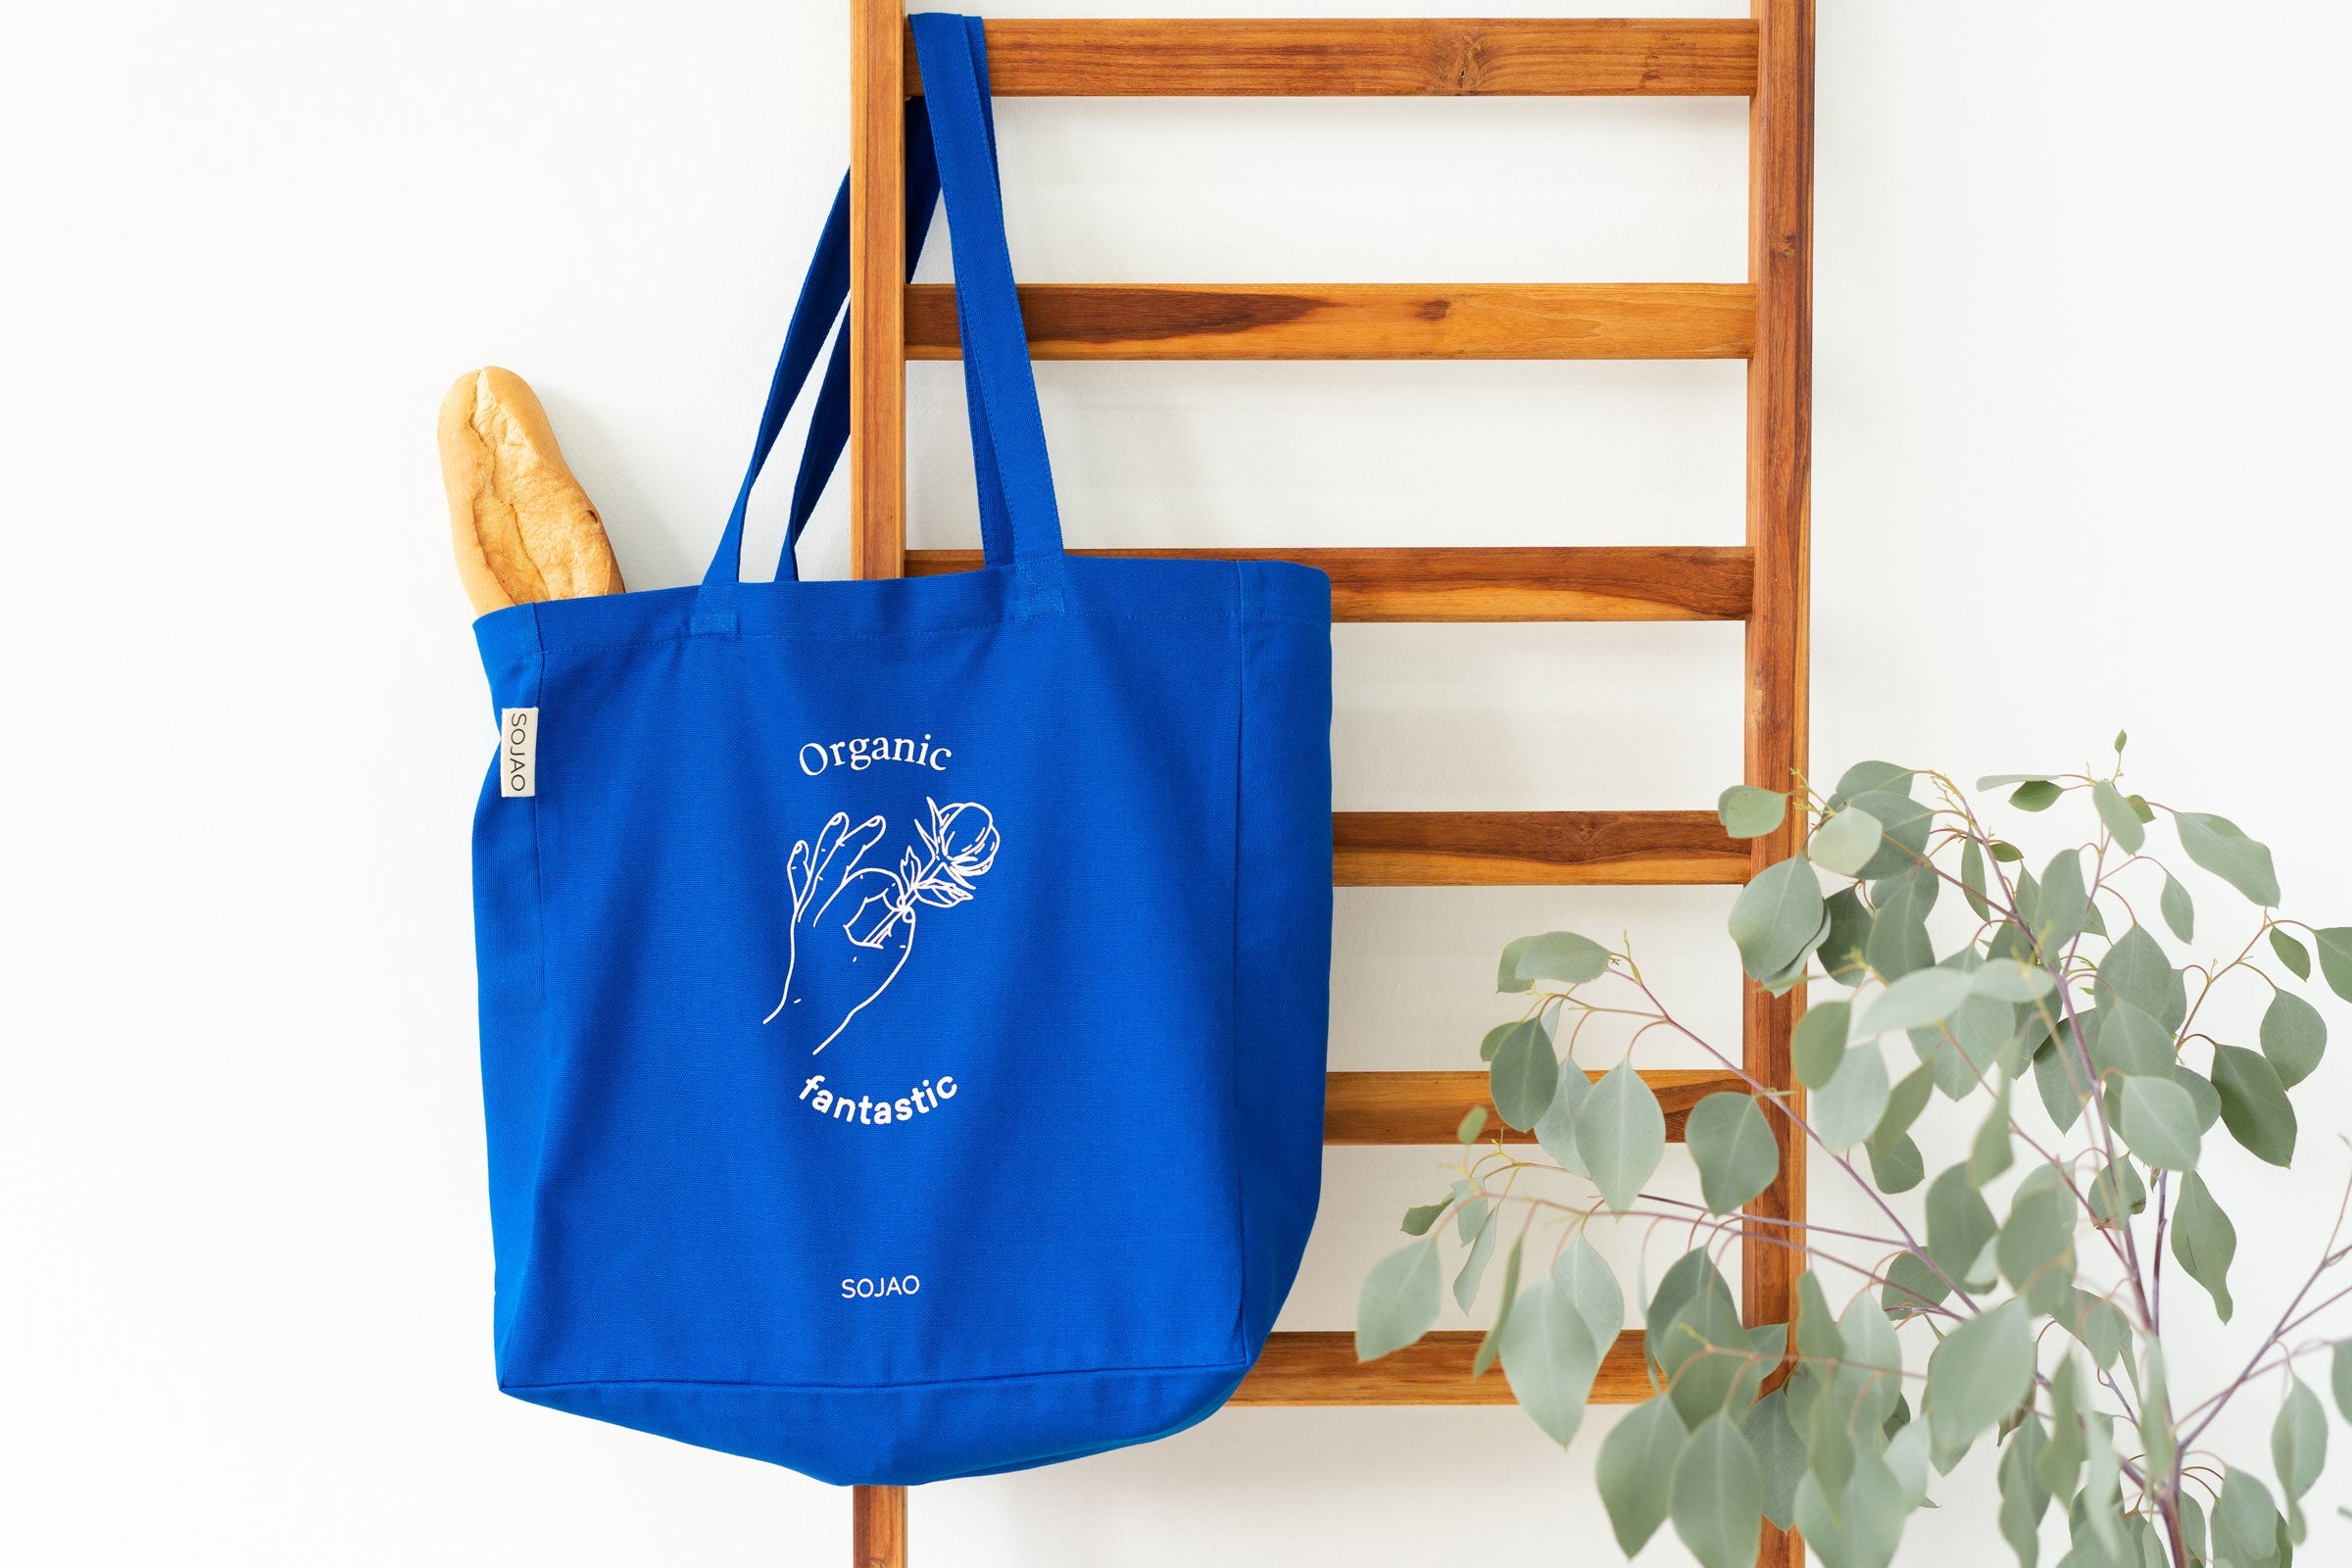 organic-cotton-tote-bag-in-blue-colour-hanging-on-a-wooden-ladder-by-sojao